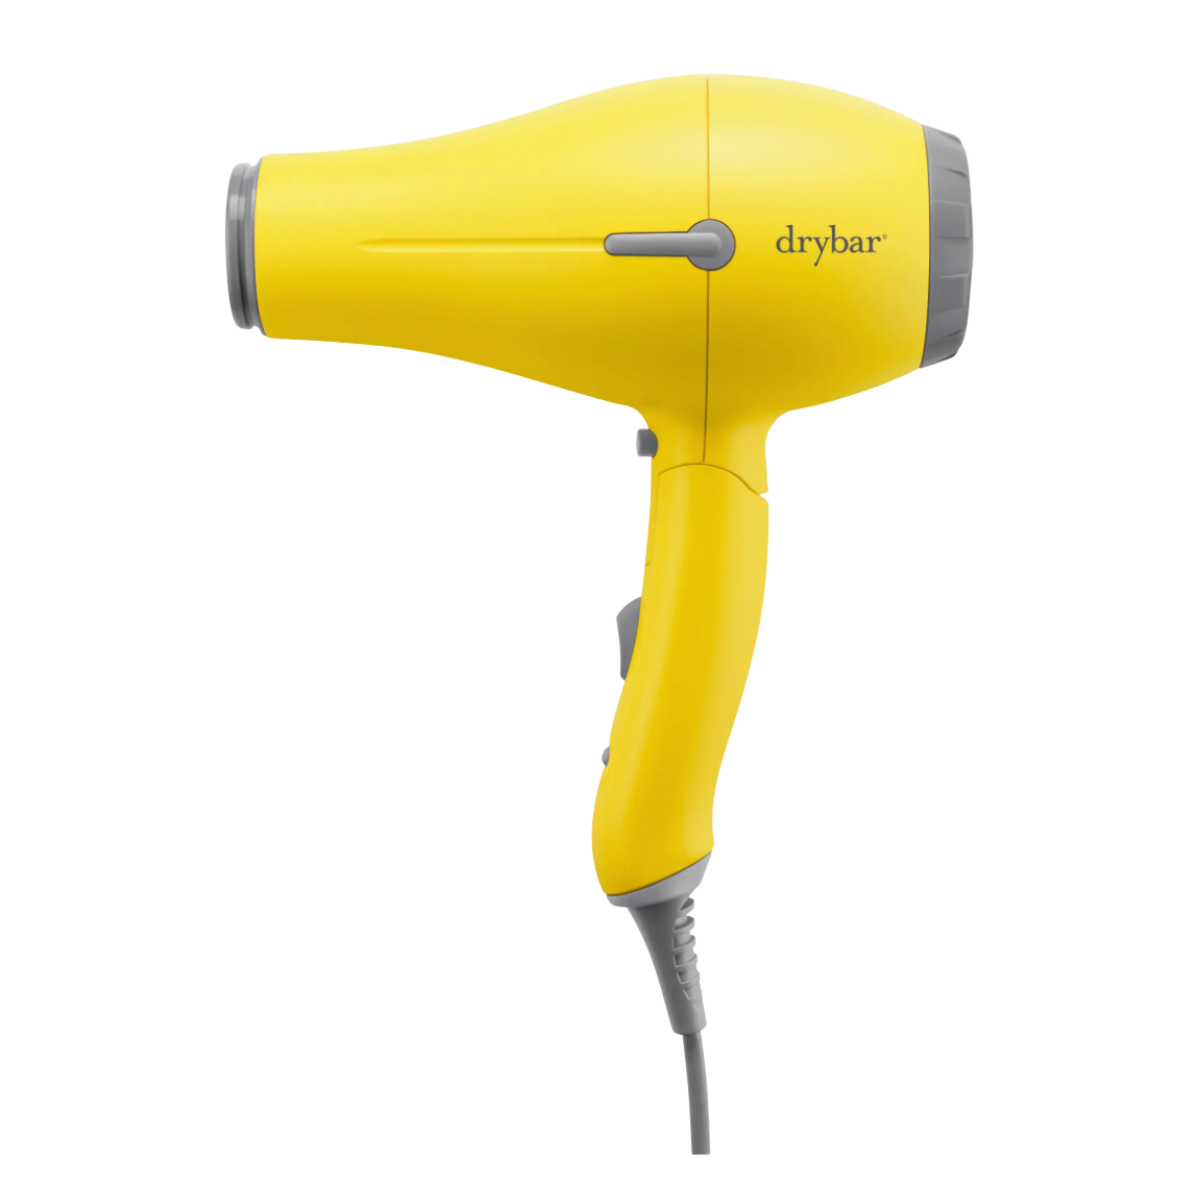 <p>This compact dryer is made by—who other—the popular blowout salon, Drybar. Like other great designs, it’s small and folds in half for better storage. But that’s not all it does—the dryer relies on ionic technology that helps increase shine, reduce frizz, and decrease drying time overall.</p> <ul> <li><strong>Pros:</strong> Dual-voltage, comes with storage bag, two heat settings, foldable handle</li> <li><strong>Cons:</strong> Some users say the handle is a bit wobbly</li> <li><strong>Weight:</strong> 13 ounces</li> <li><strong>Dual Voltage:</strong> Yes</li> </ul> <p><em>Save when you shop the best travel hair dryers with these <a href="https://www.glamour.com/coupons/nordstrom?mbid=synd_msn_rss&utm_source=msn&utm_medium=syndication">Nordstrom promo codes</a> and <a href="https://www.glamour.com/coupons/ulta?mbid=synd_msn_rss&utm_source=msn&utm_medium=syndication">Ulta promo codes</a>.</em></p> $139, Ulta. <a href="https://www.ulta.com/p/baby-buttercup-travel-blow-dryer-xlsImpprod14531001?">Get it now!</a><p>Sign up for today’s biggest stories, from pop culture to politics.</p><a href="https://www.glamour.com/newsletter/news?sourceCode=msnsend">Sign Up</a>